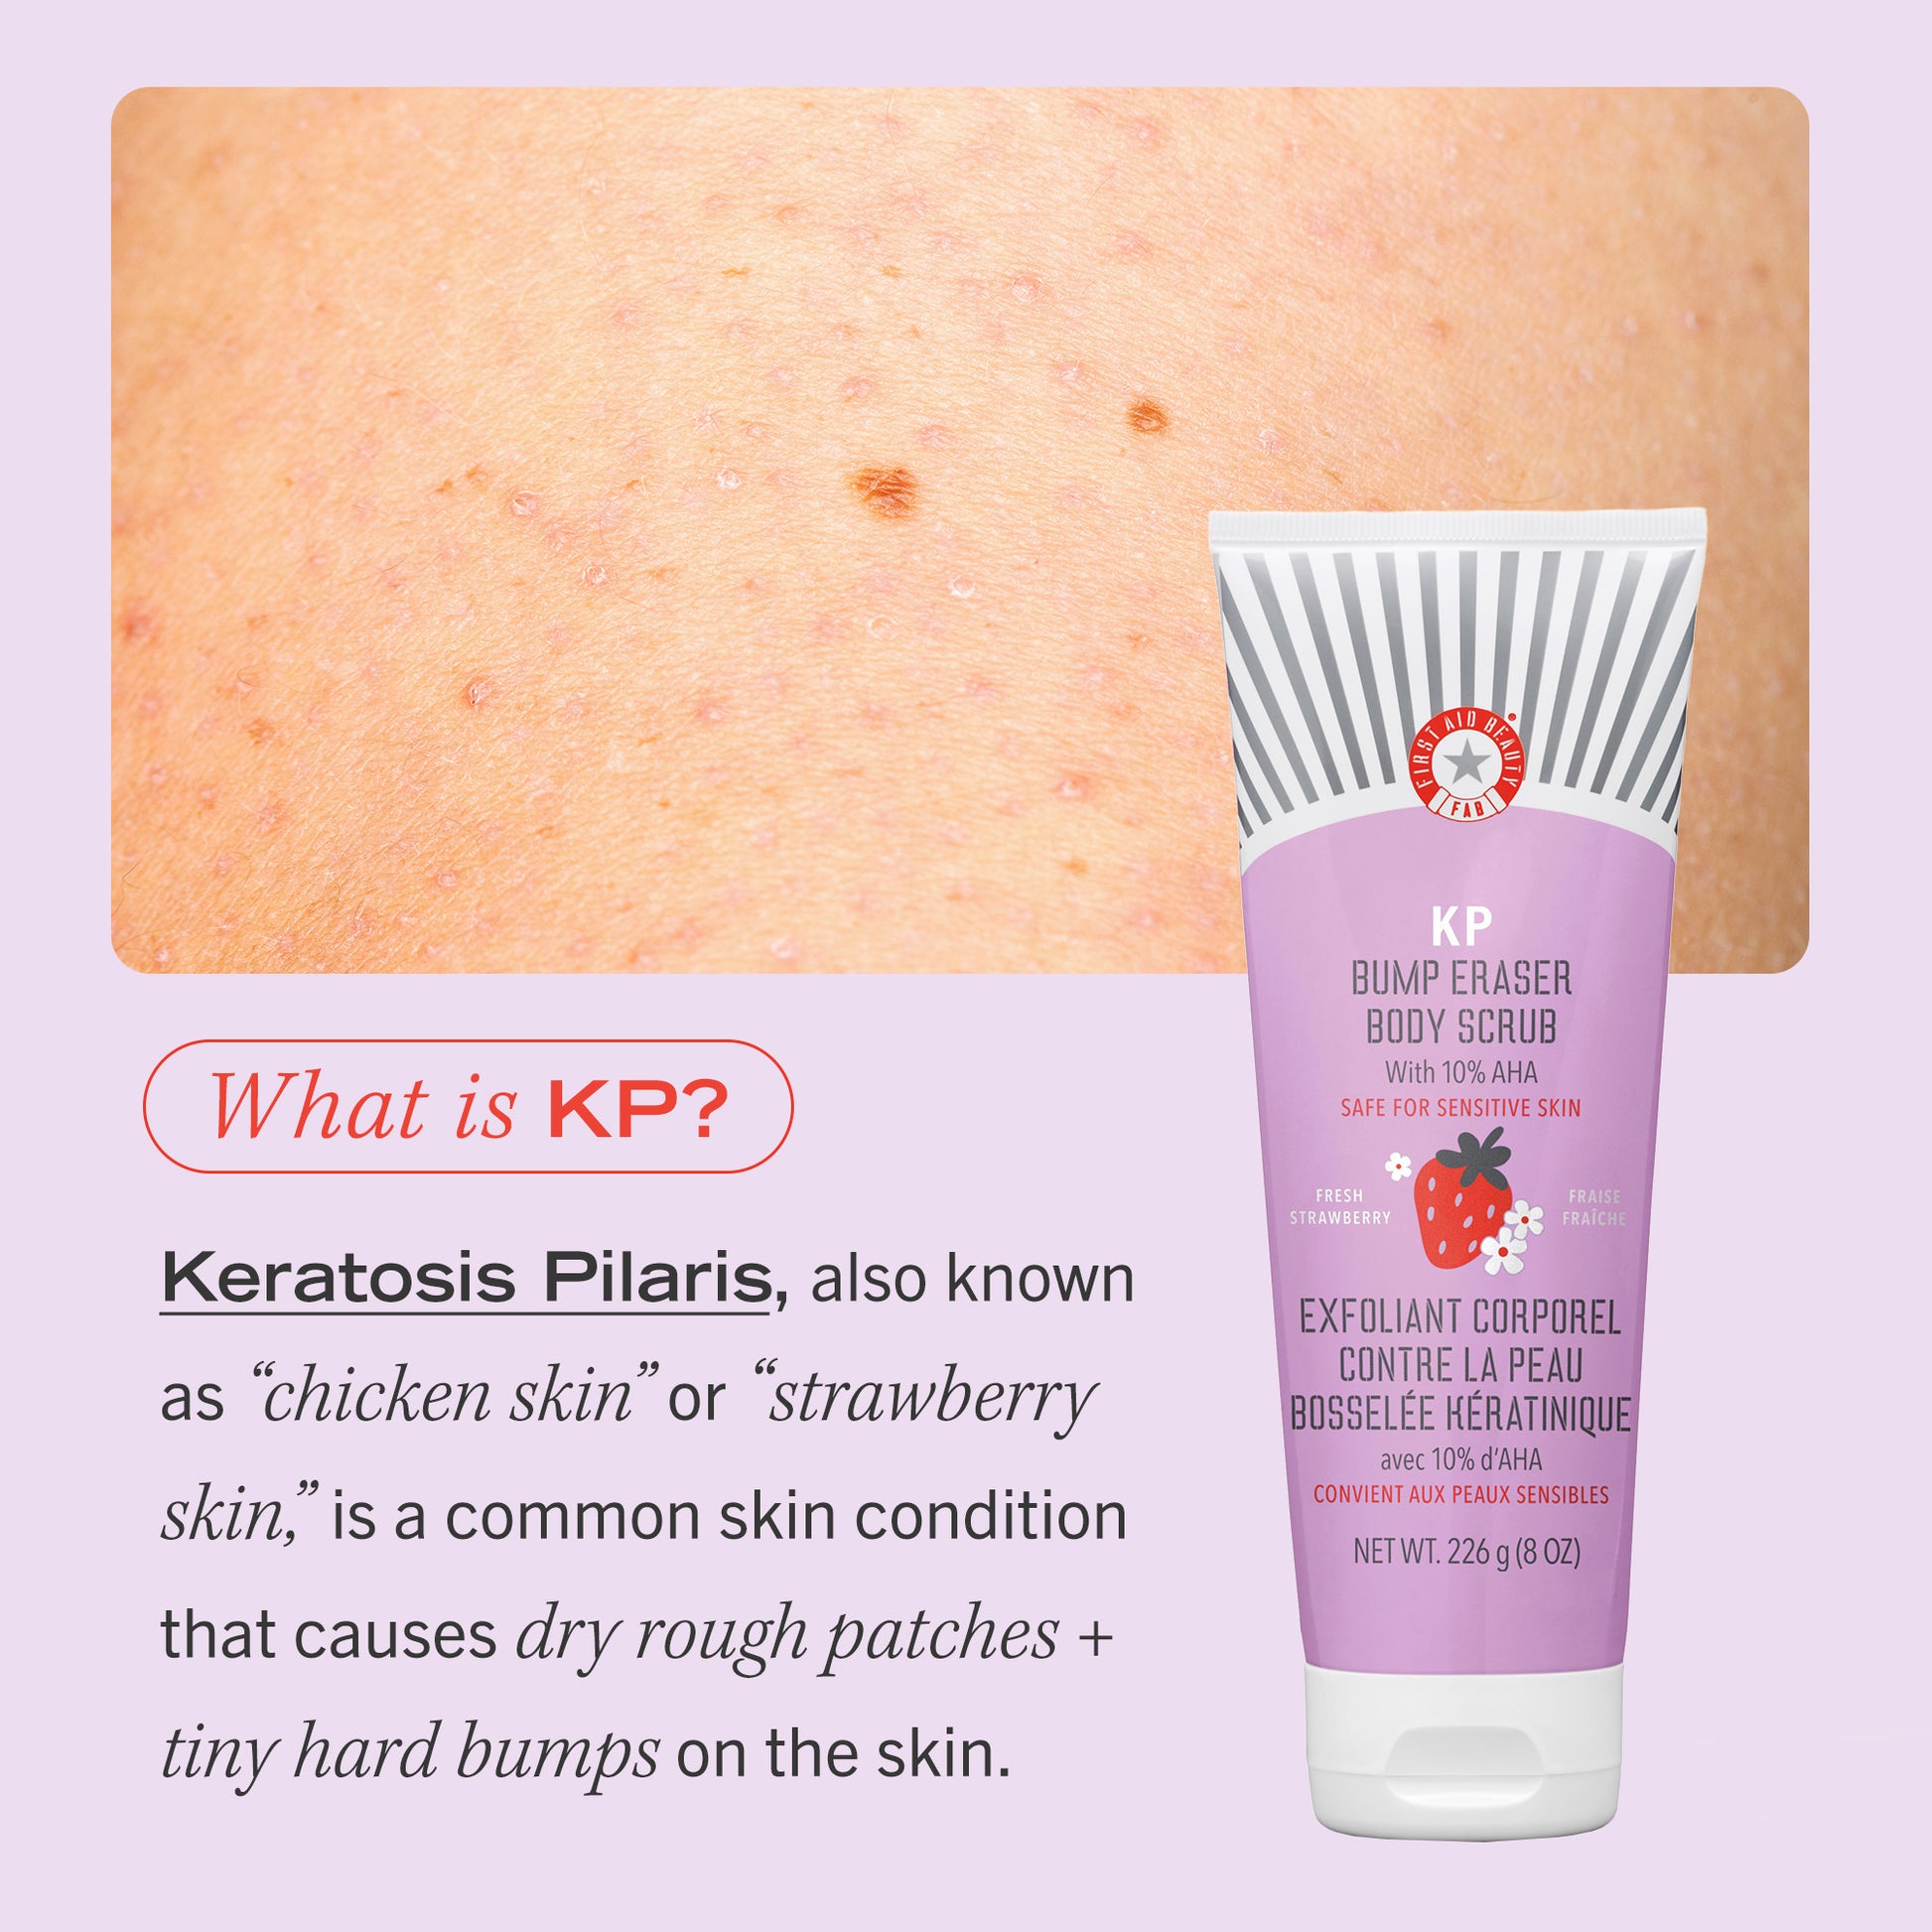 What is KP?  Keratosis Pilaris, also known as "chicken skin" or "strawberry skin," is a common skin condition that causes dry rough patches + tiny hard bumps on the skin.